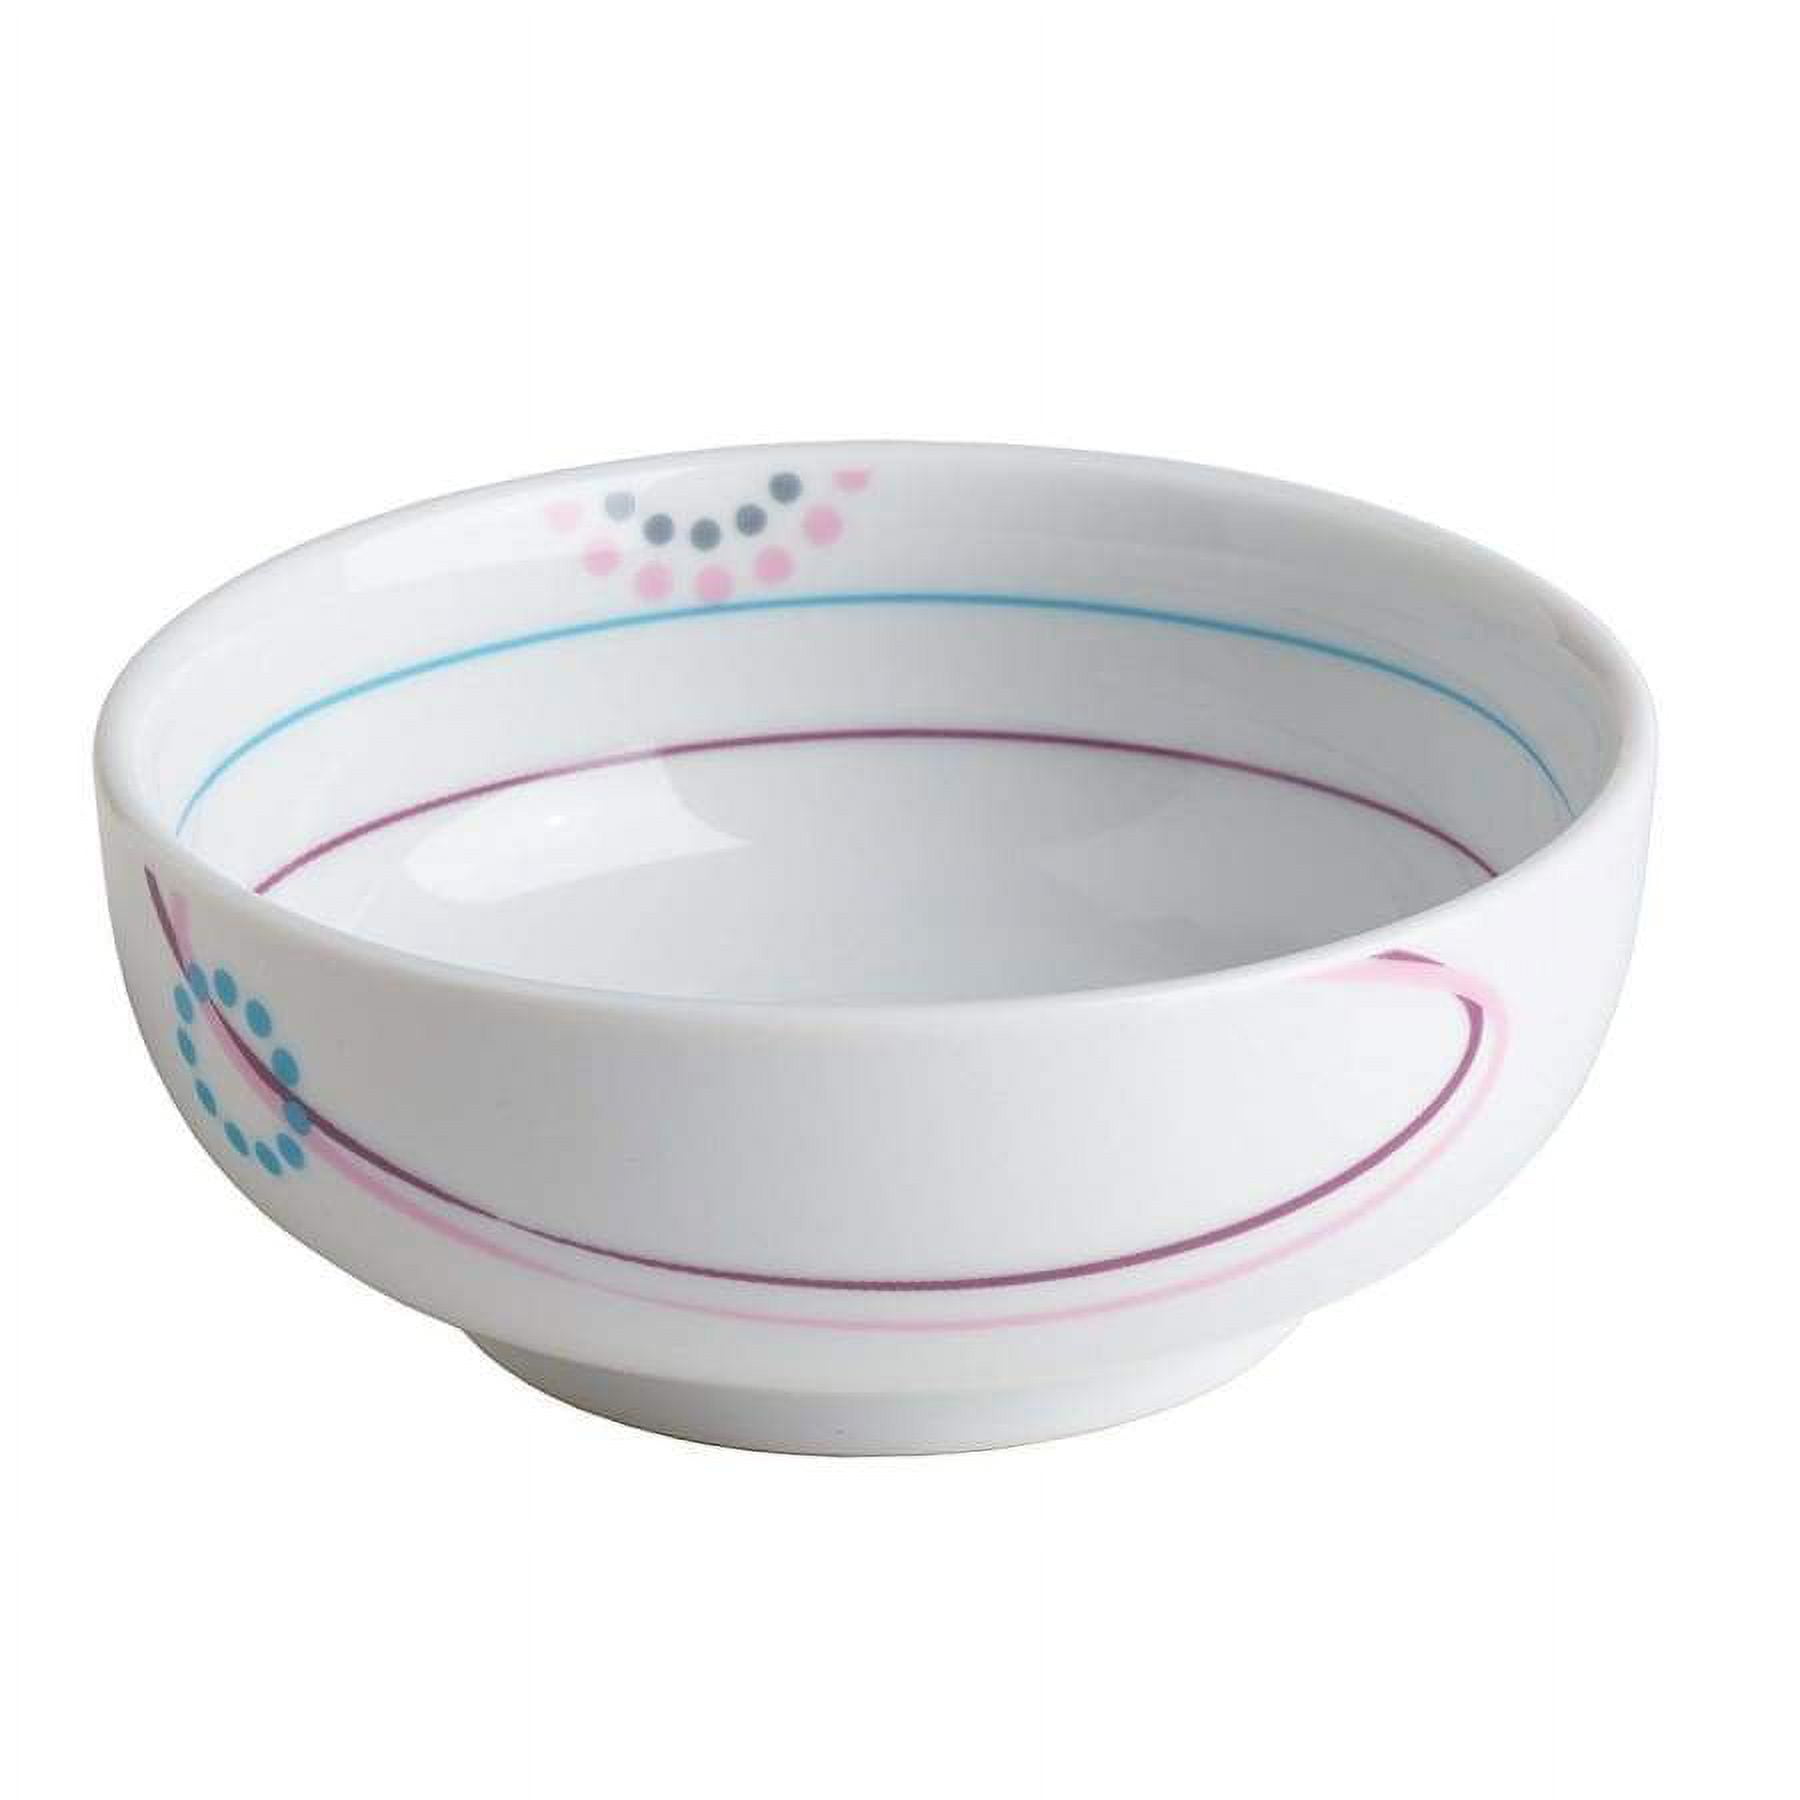 Evie's Kitchen Portion control bowls for weight loss set of 2